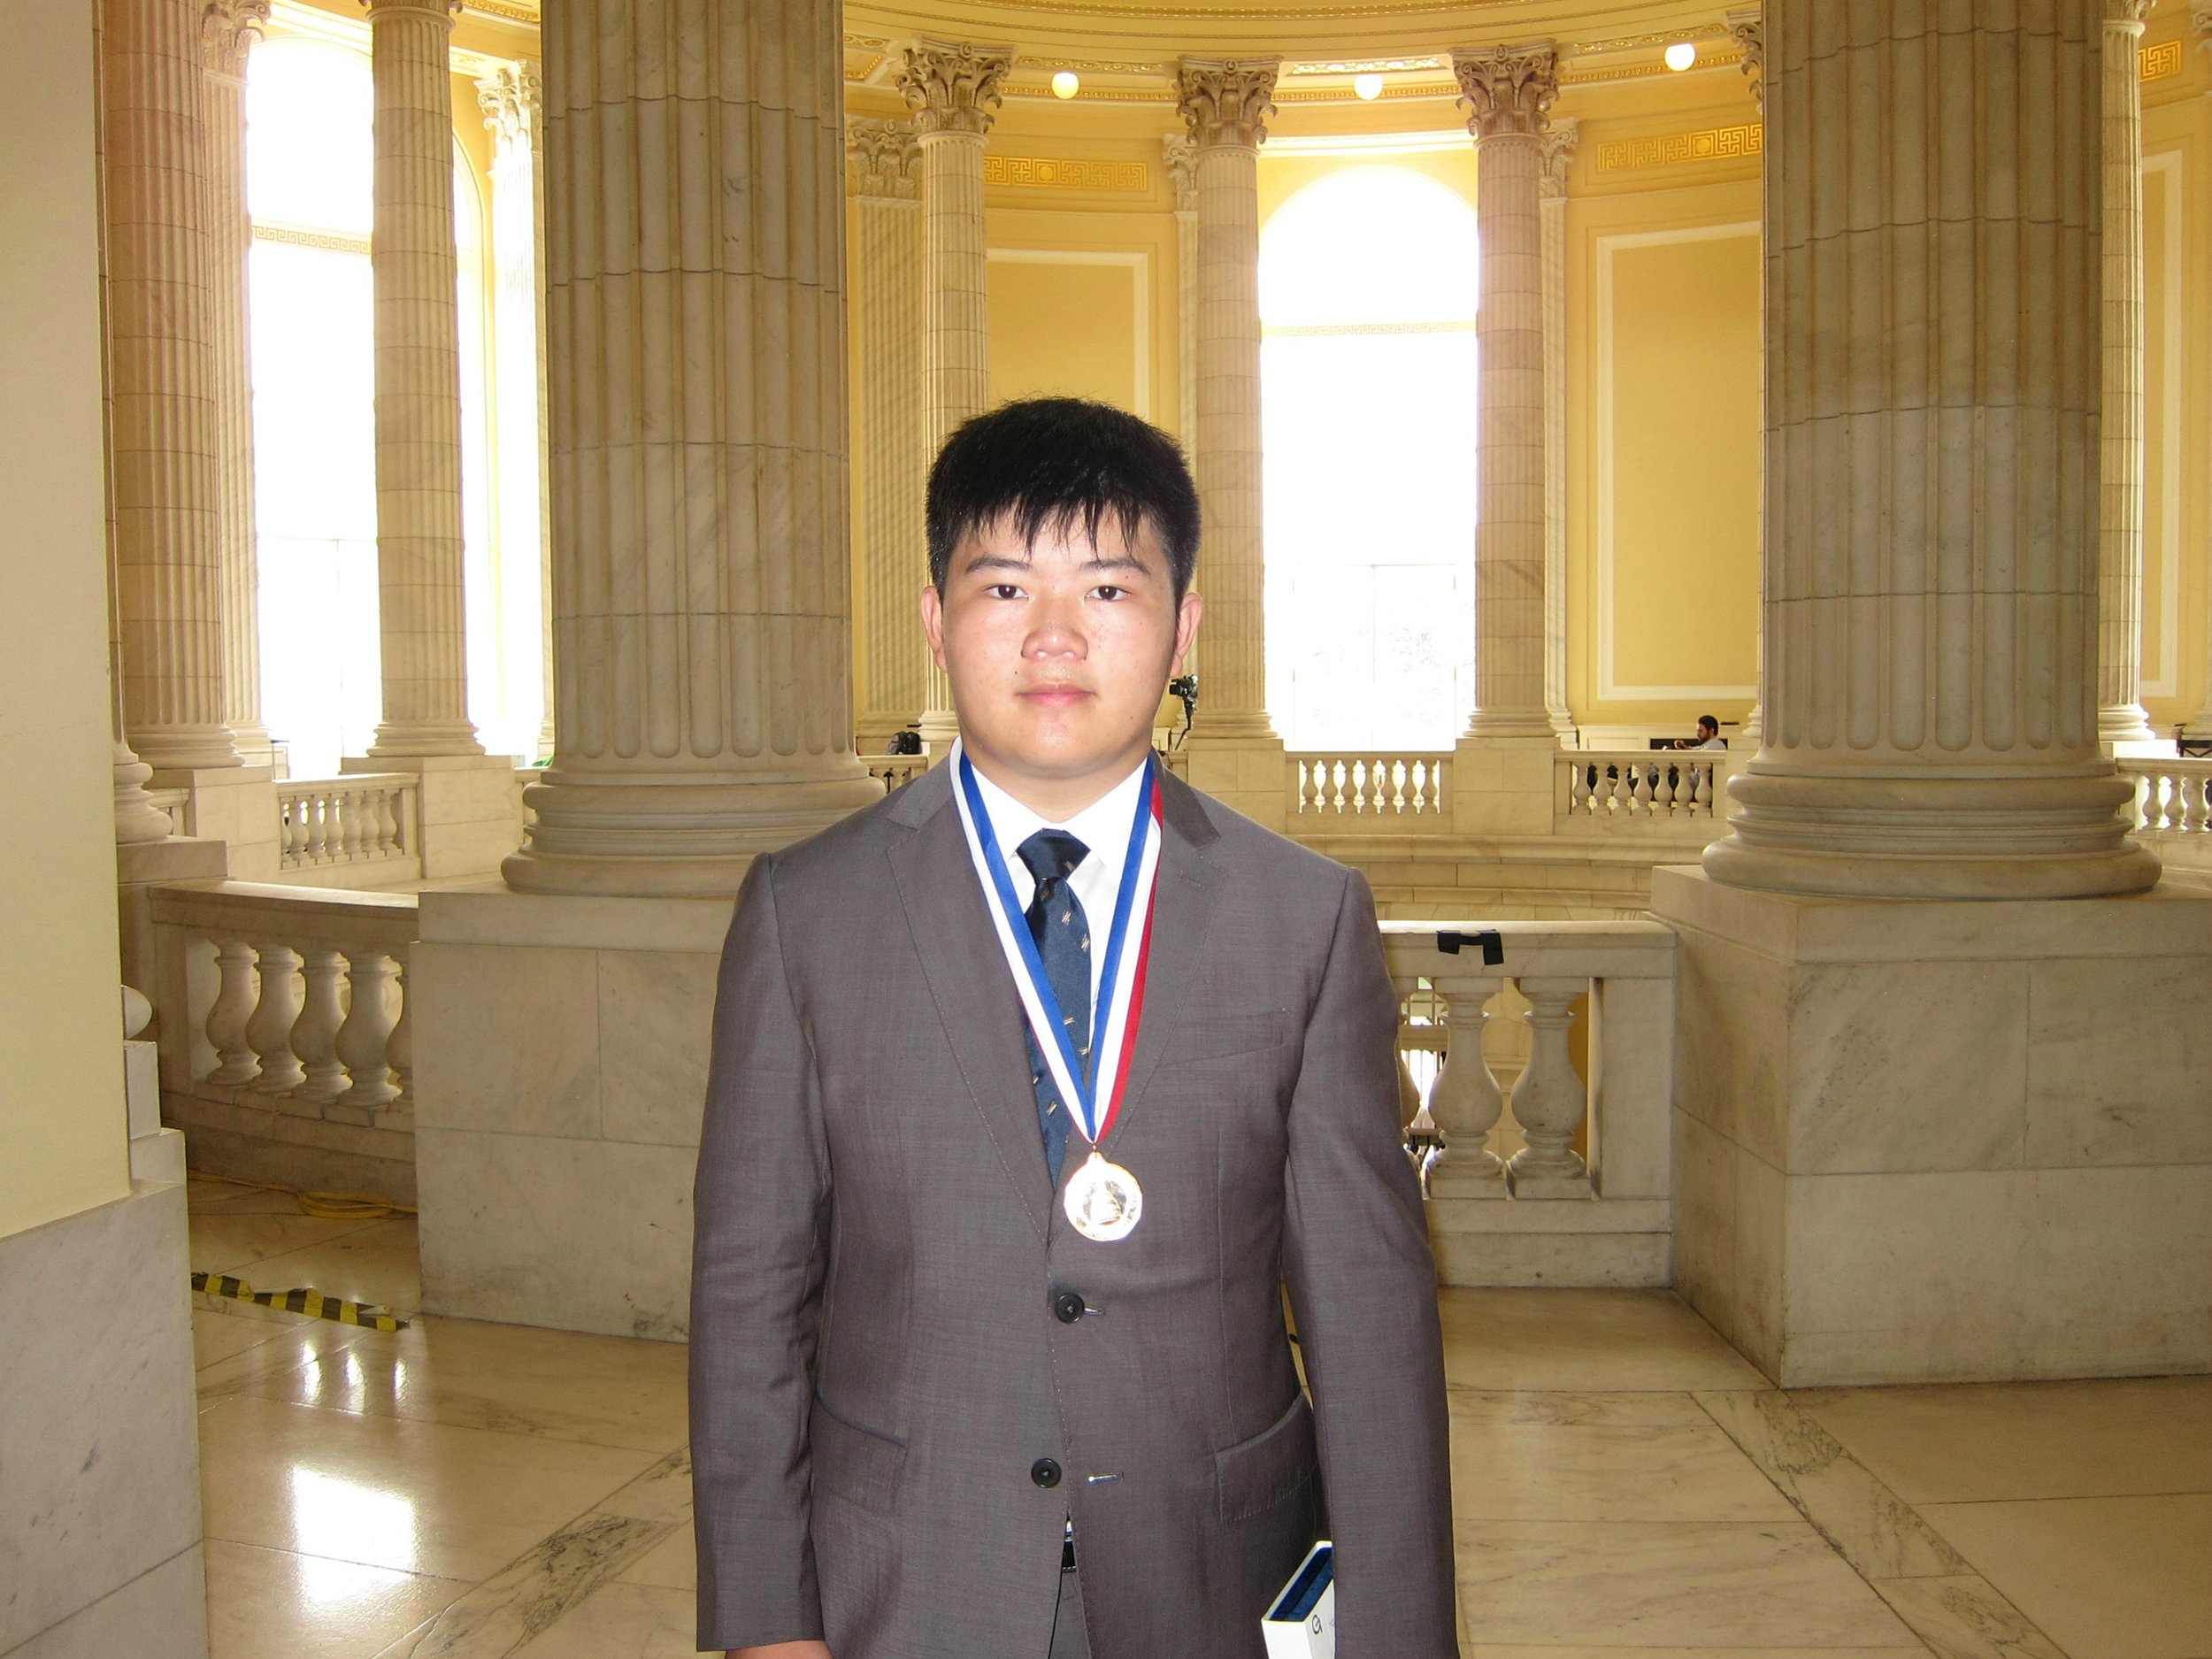 Terence Lee, 2016 Congressional Award Gold Medalist at the Cannon Caucus Room on Capitol Hill 